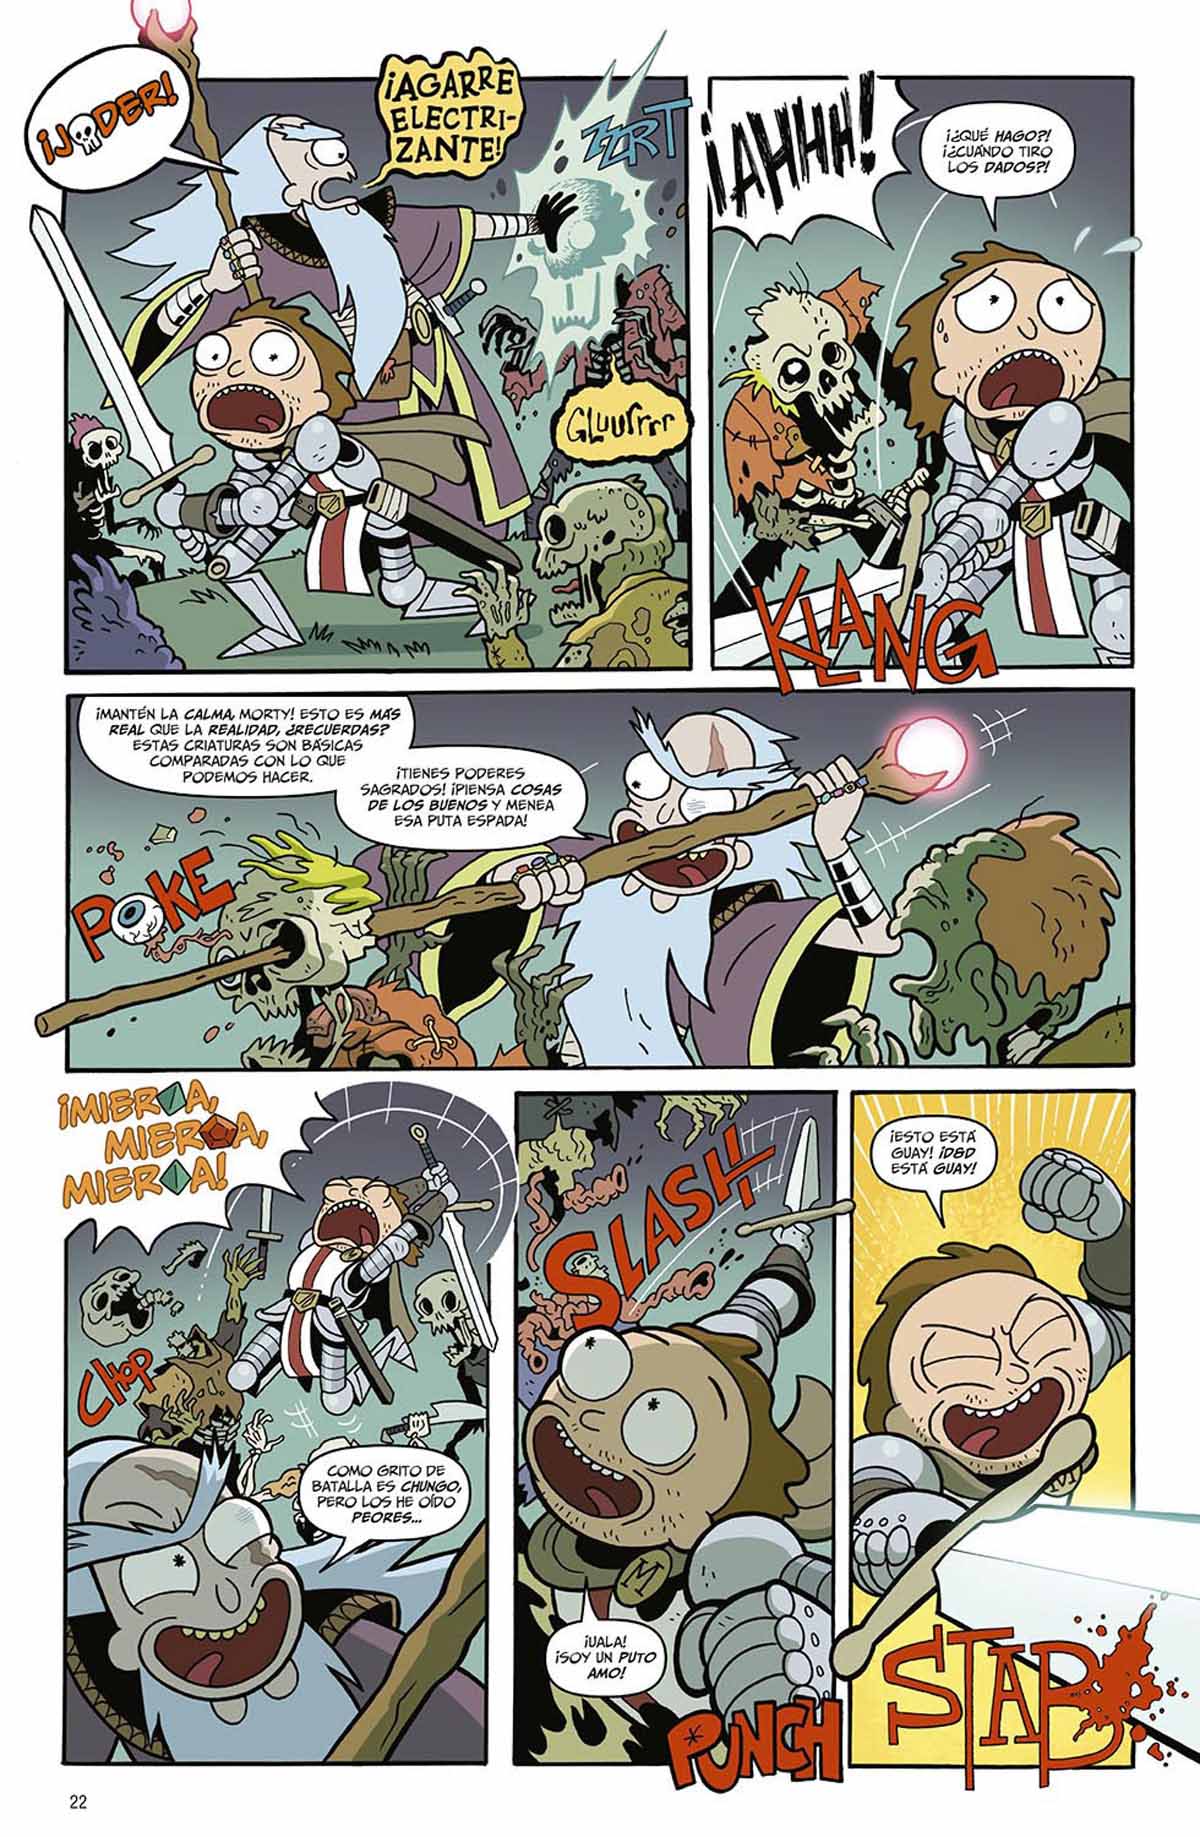 Reseña: ‘Rick y Morty VS Dungeons & Dragons’